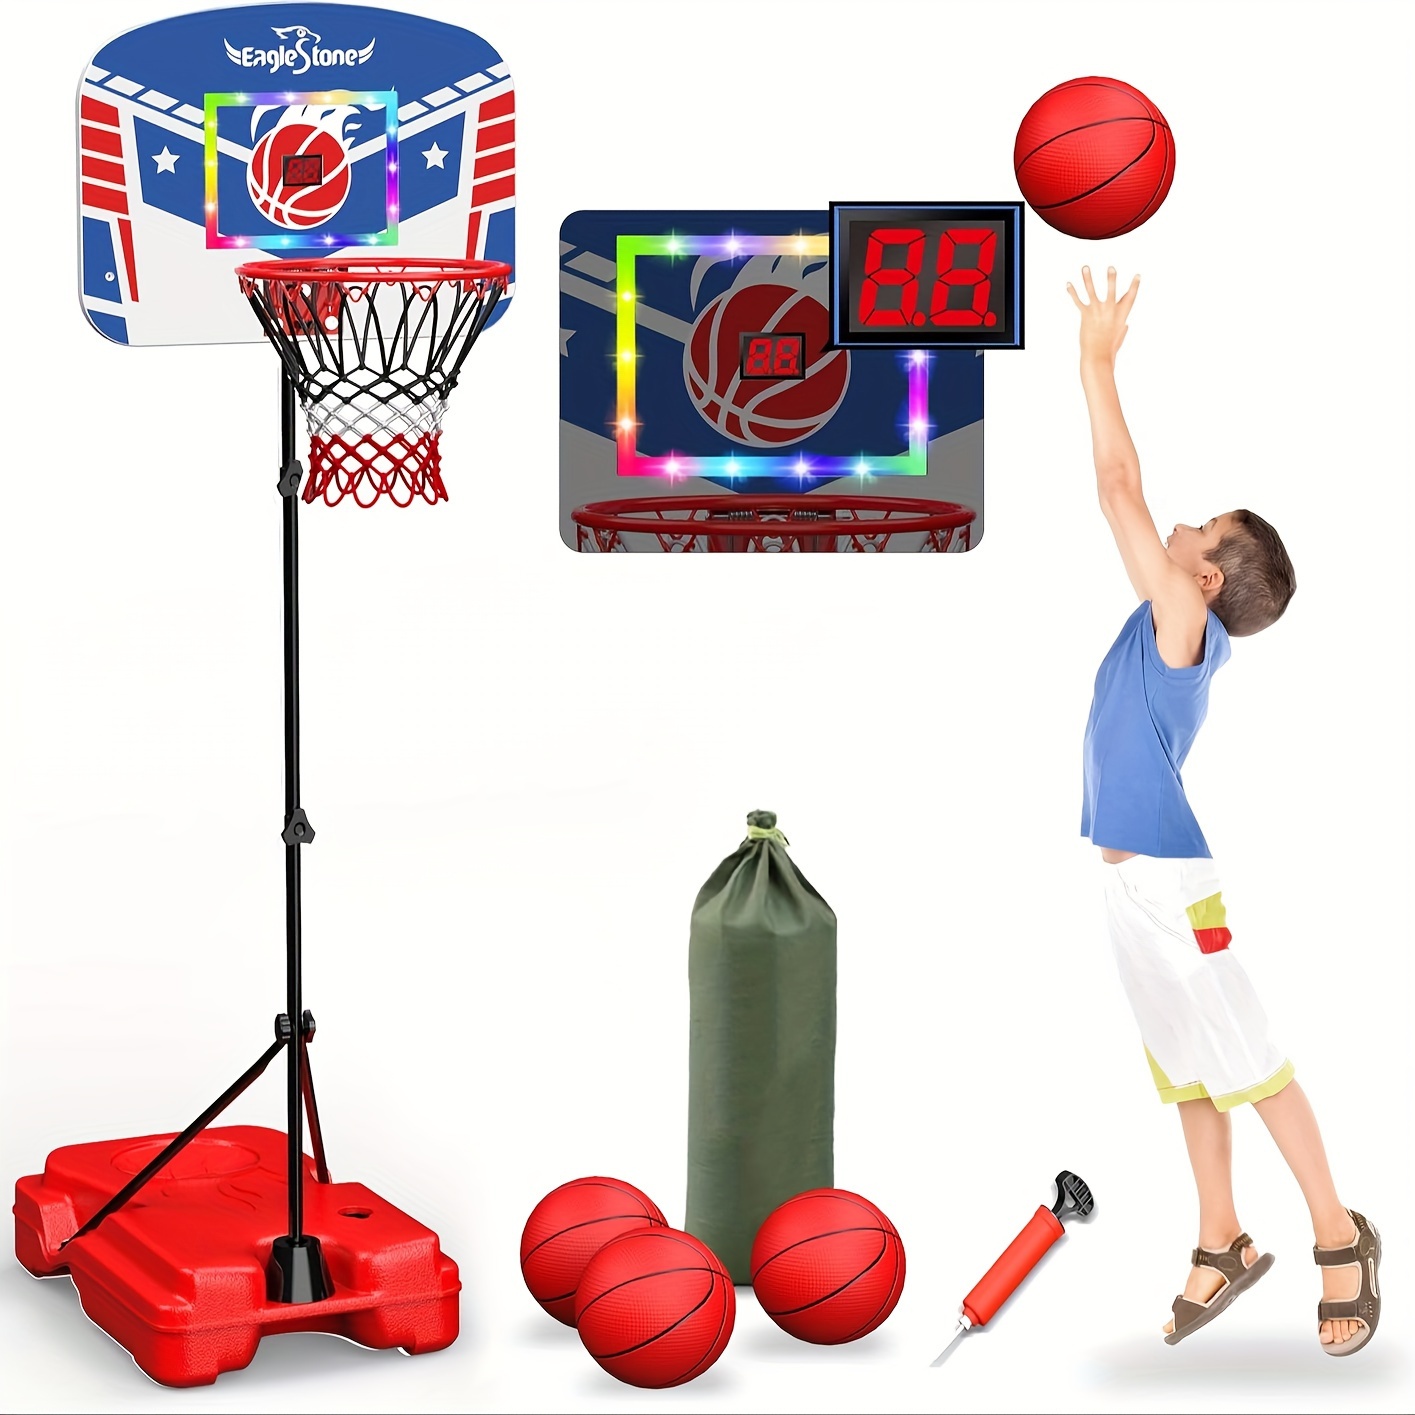 

Eaglestone Kid Basketball Hoop Indoor, Basketball Hoop Toddler Adjustable Height 2.9ft-6ftled With Lights & Scoreboard, Mini Hoop Outdoor With 3 Balls, Basketball Toy Gifts For 3-12 Year